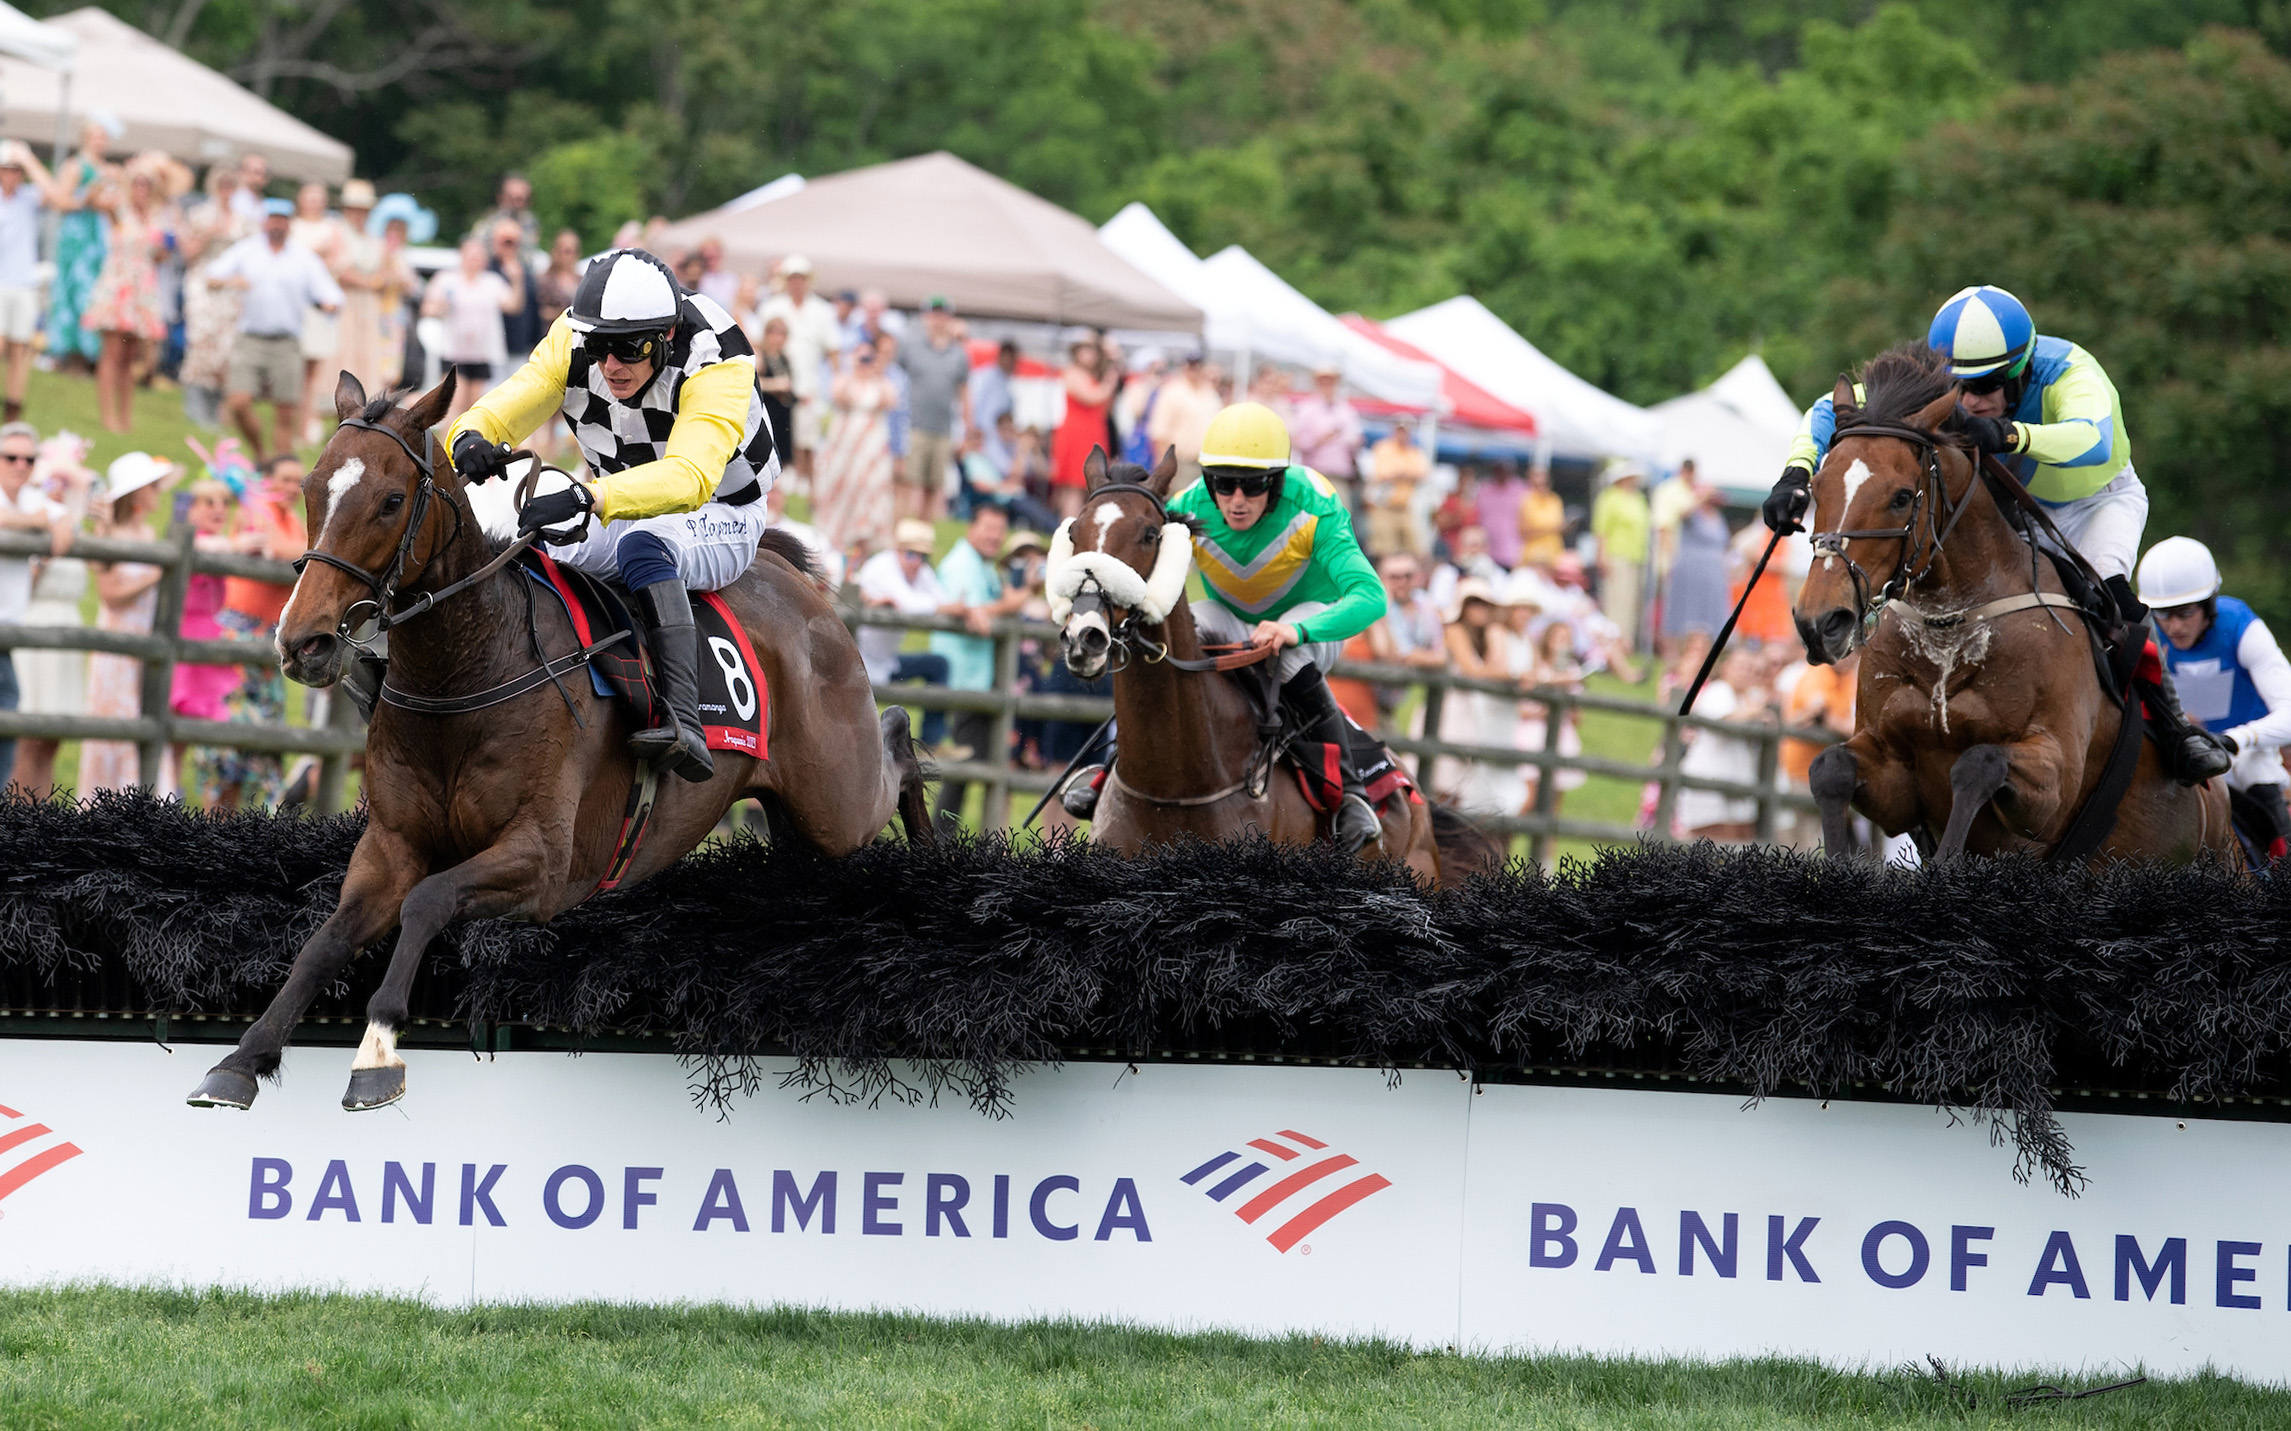 https://nationalsteeplechase.com/wp-content/uploads/2023/05/Scaramanga-leads-Snap-Decision-over-last-in-iroquois-3.jpg